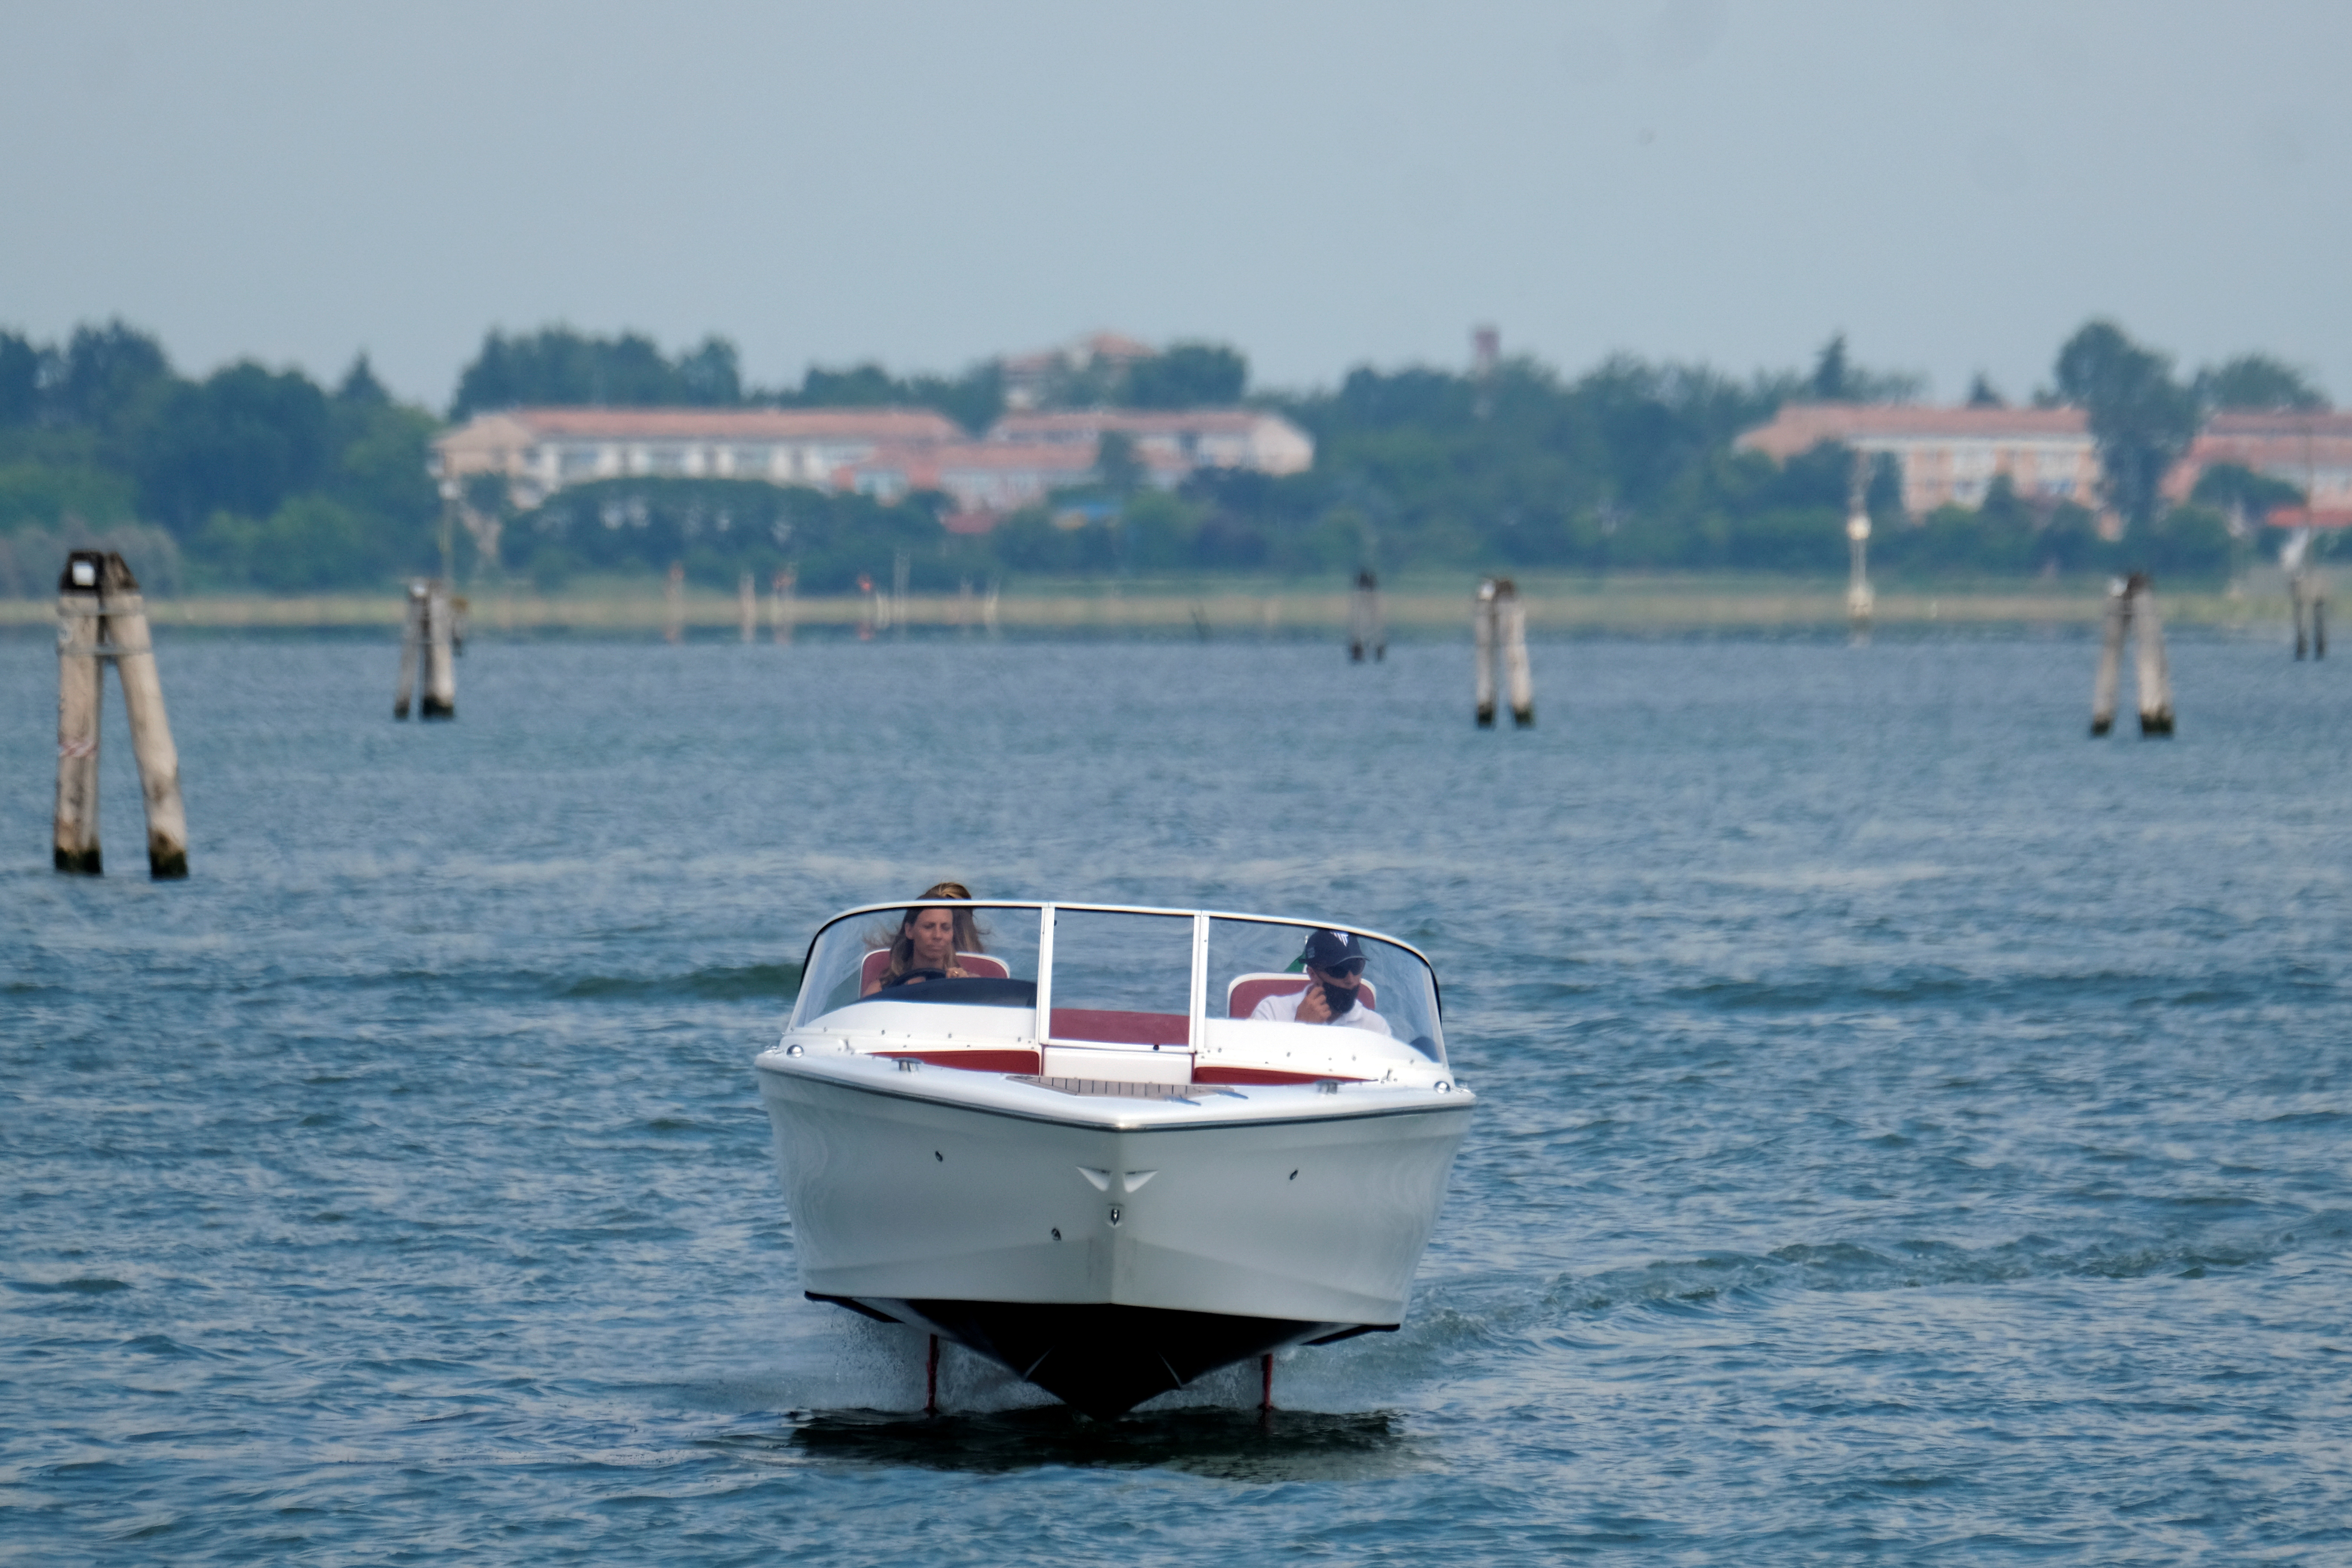 A new Swedish-designed electric boat is tested during the Salone Nautico in the lagoon city of Venice